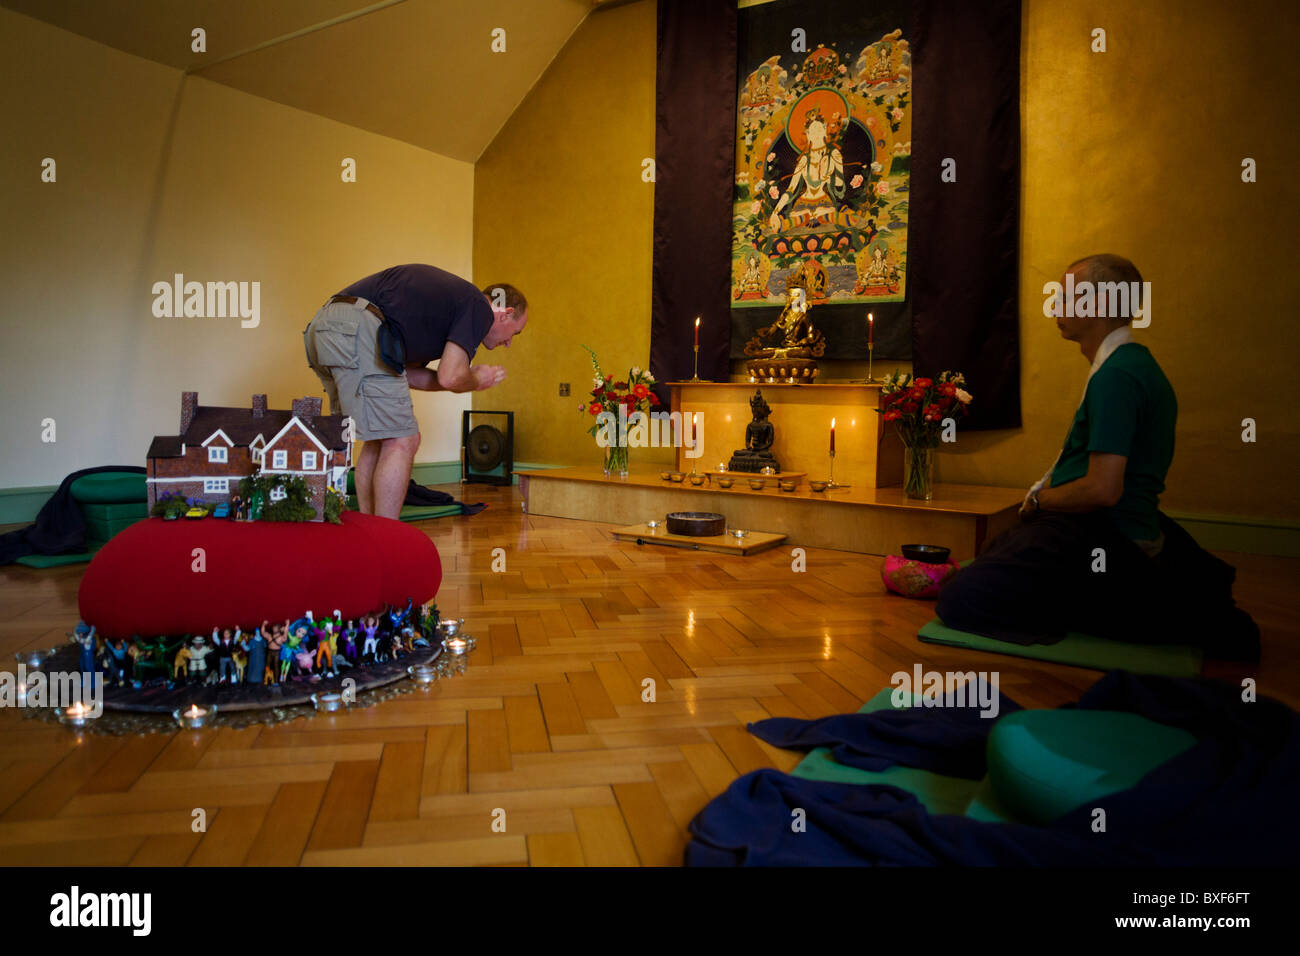 Buddhists after silent meditation for 30 minutes in their Shrine Room at the Rivendell Buddhist Retreat Centre. Stock Photo